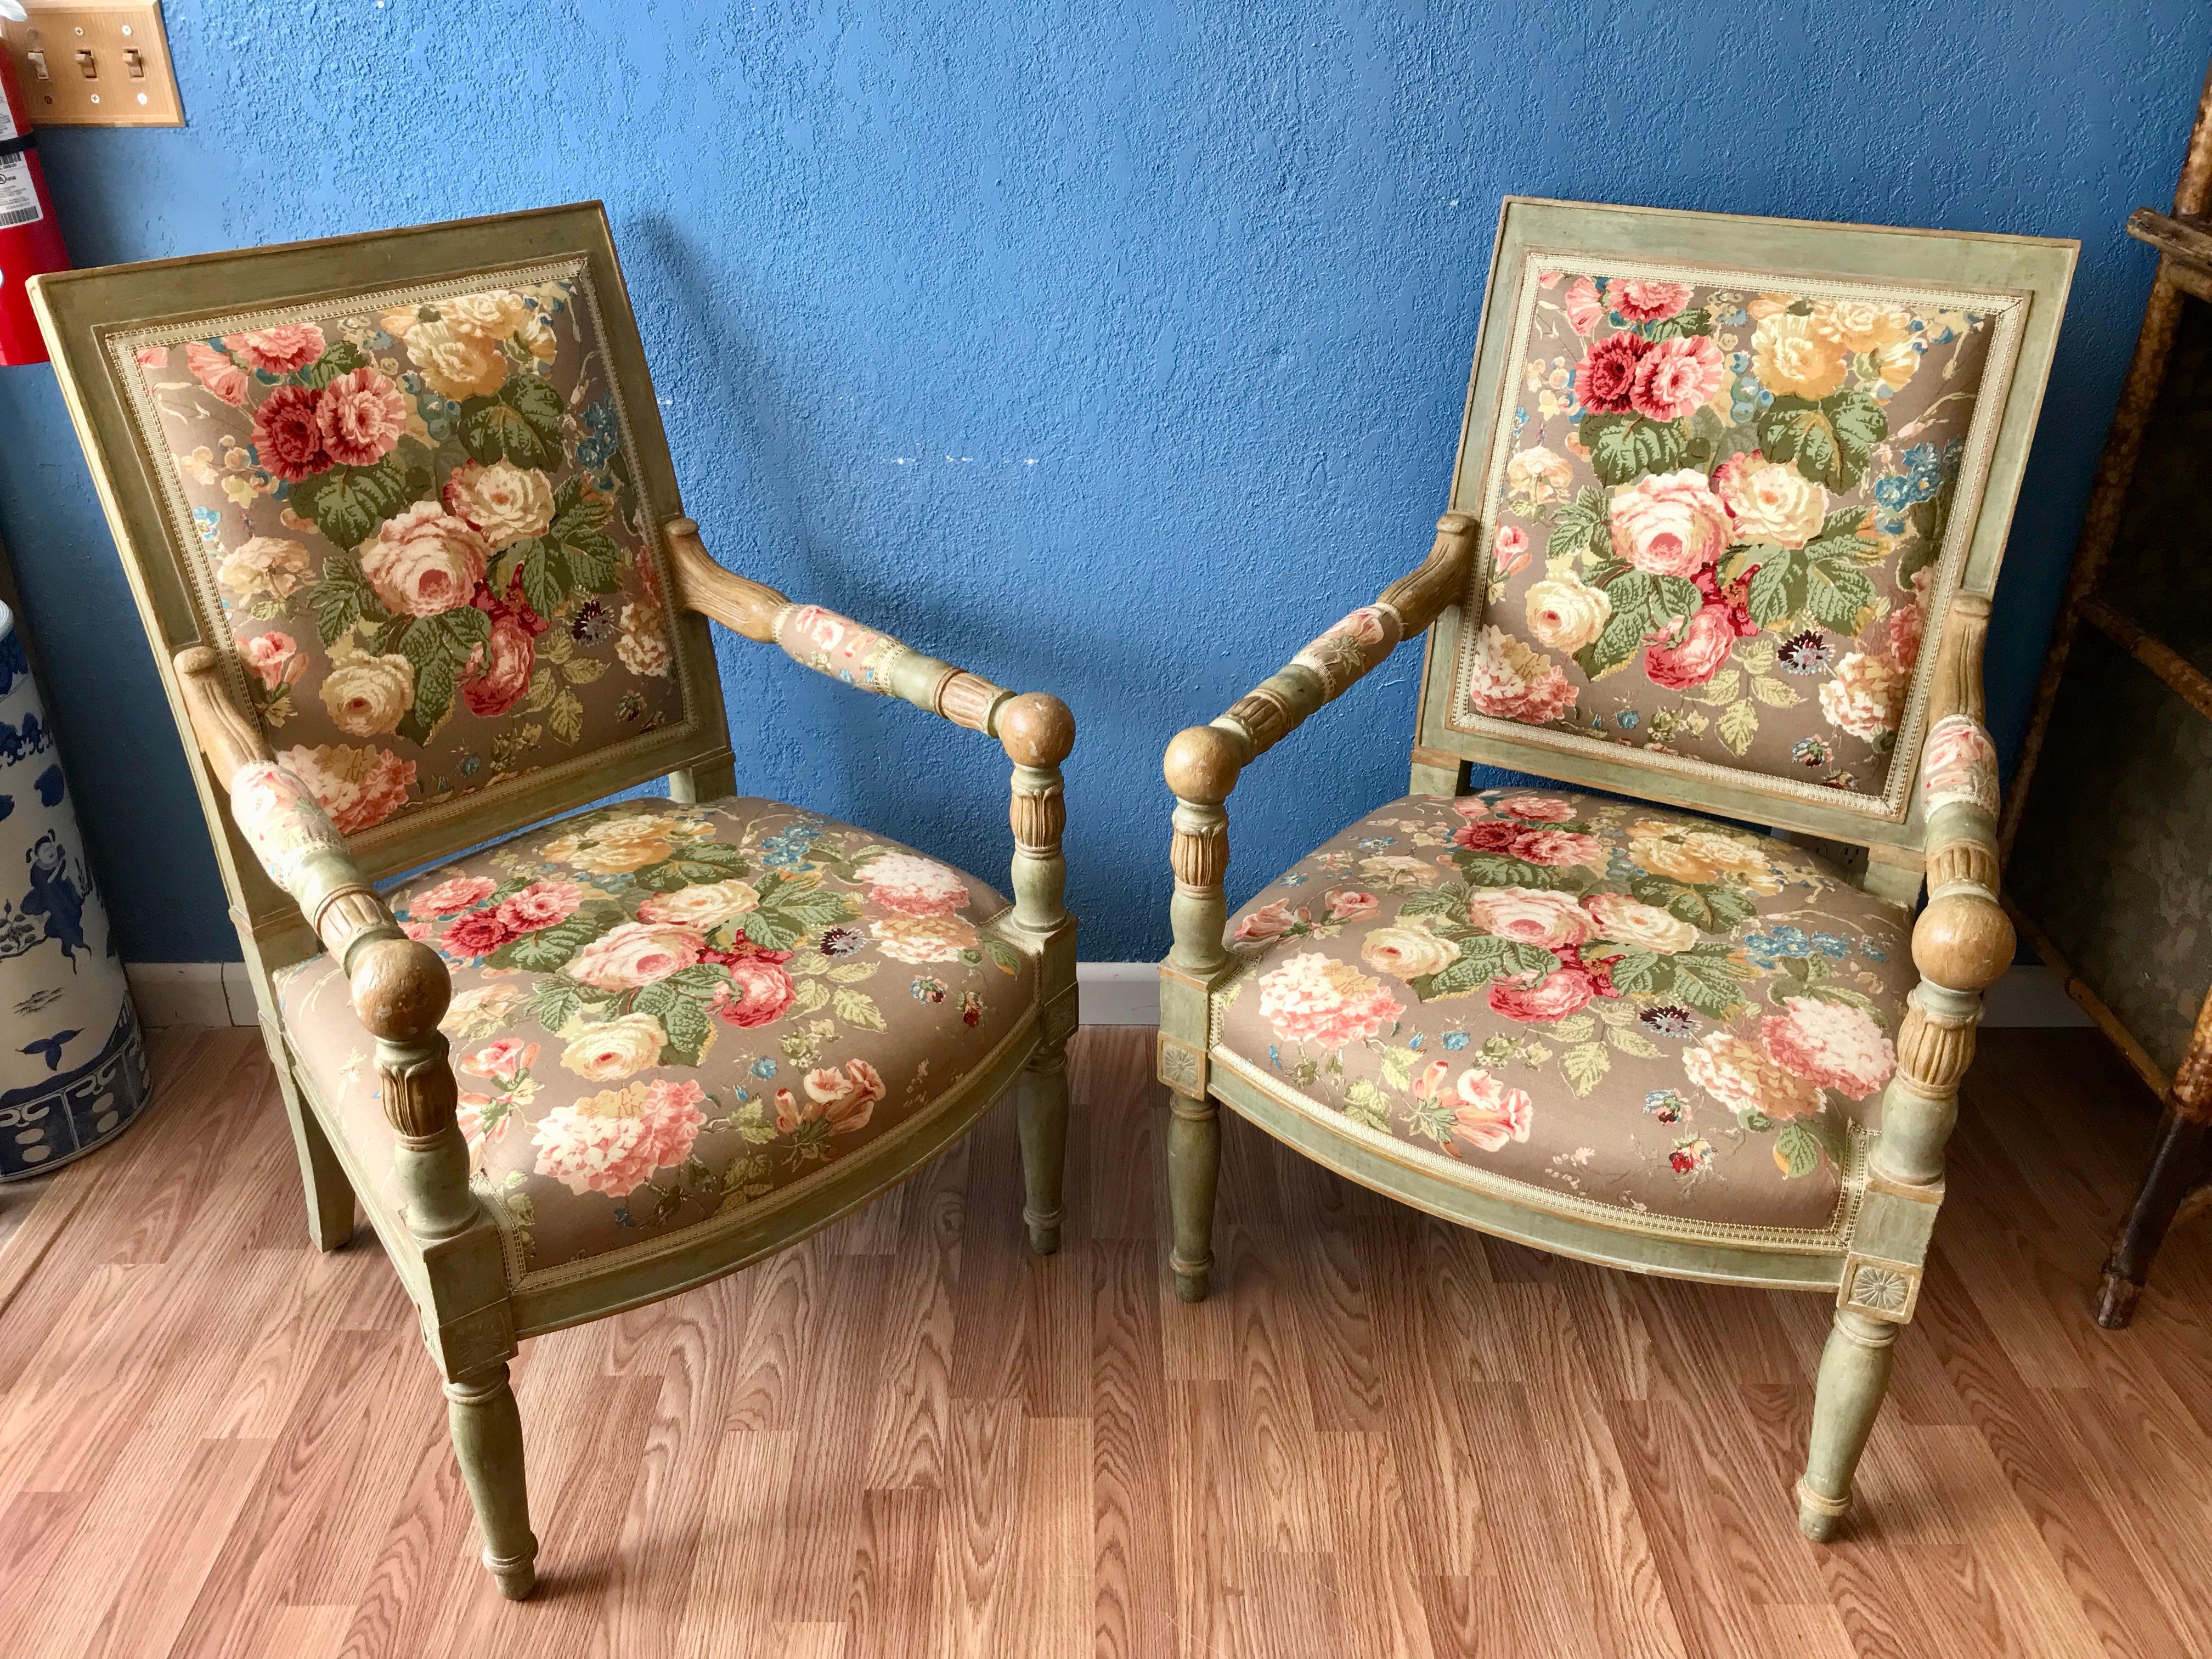 The carved chairs are finished with a tasteful green wash and upholstered with a lovely floral fabric.